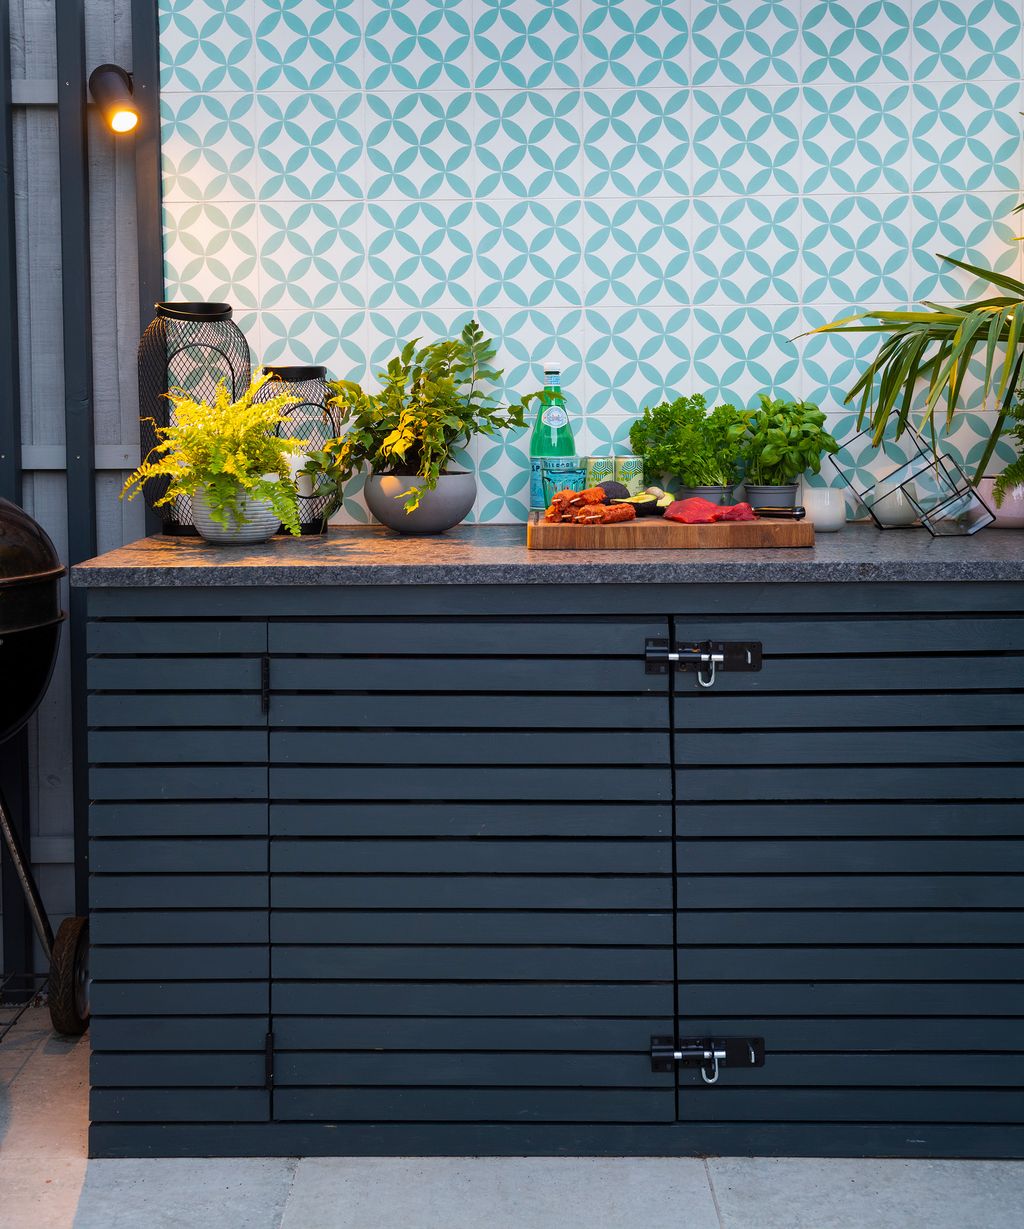 How to plan an outdoor kitchen: a step-by-step guide